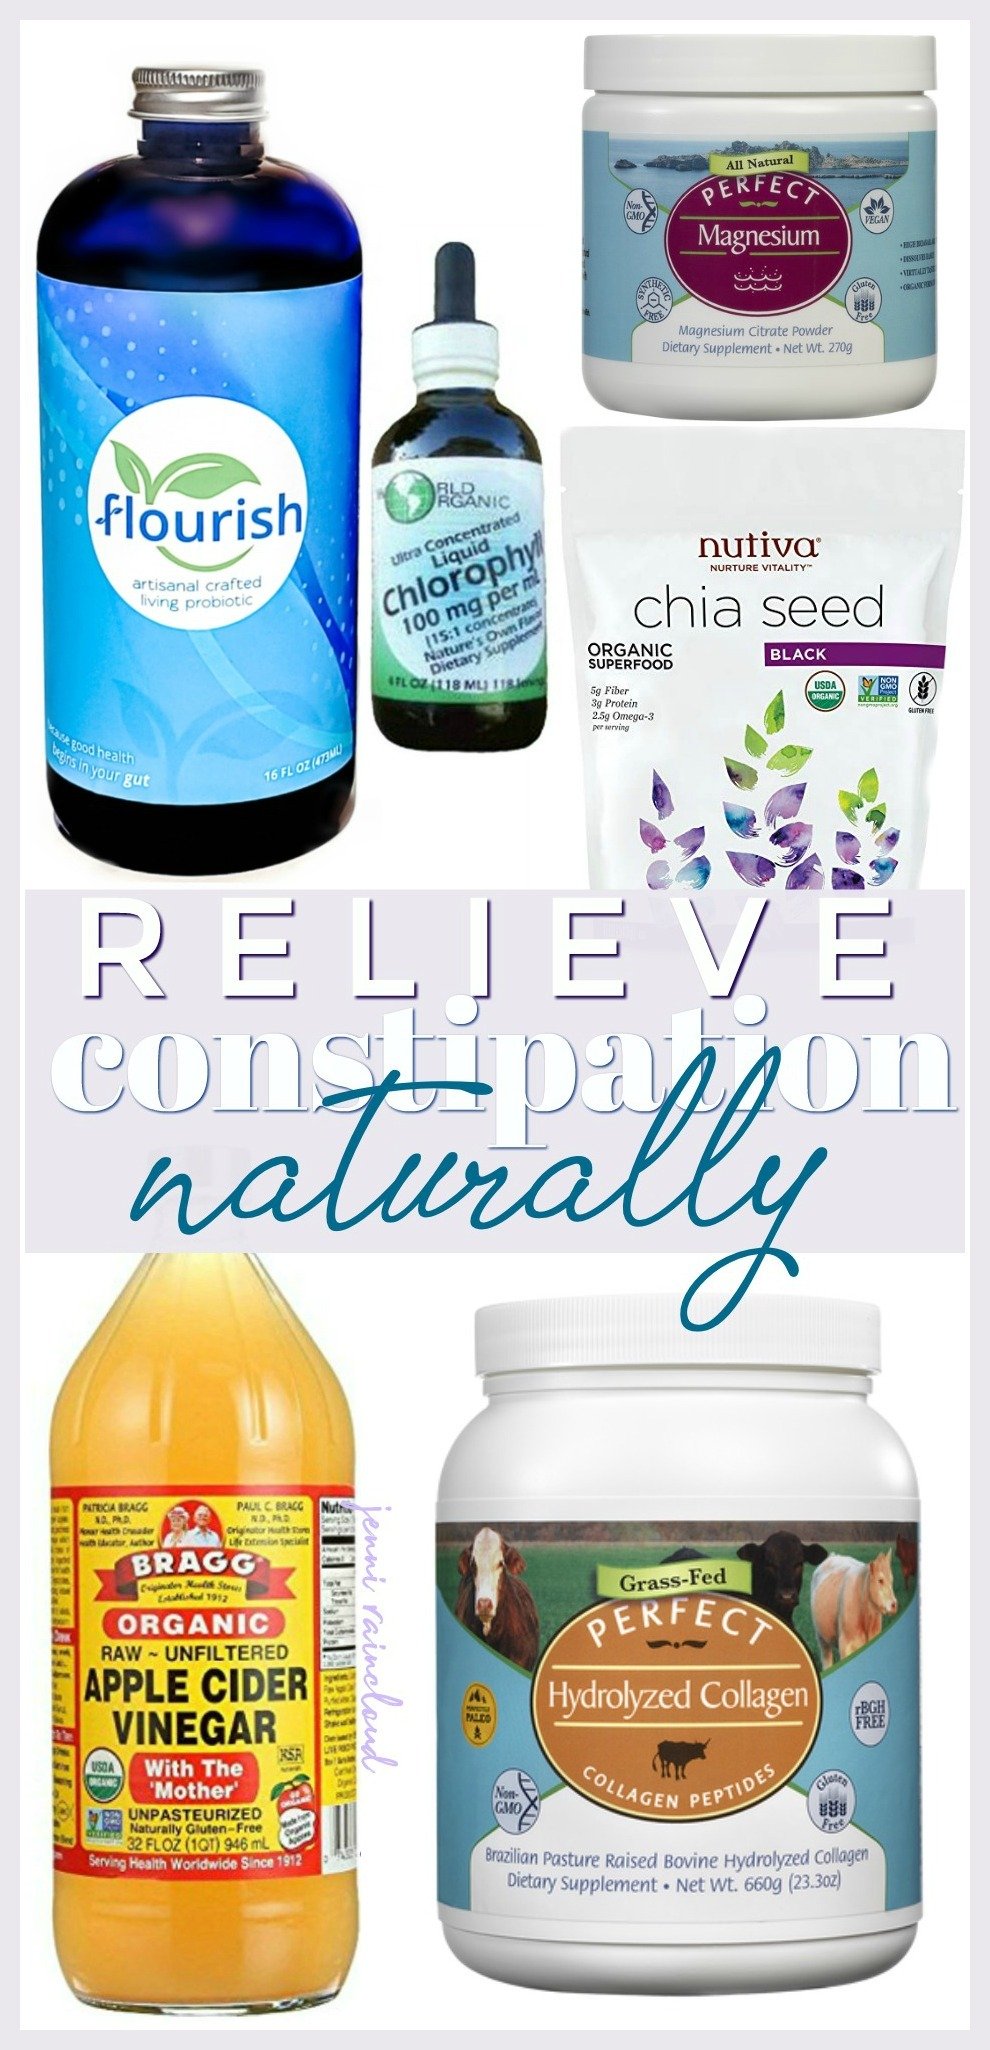 Relieve Constipation Naturally